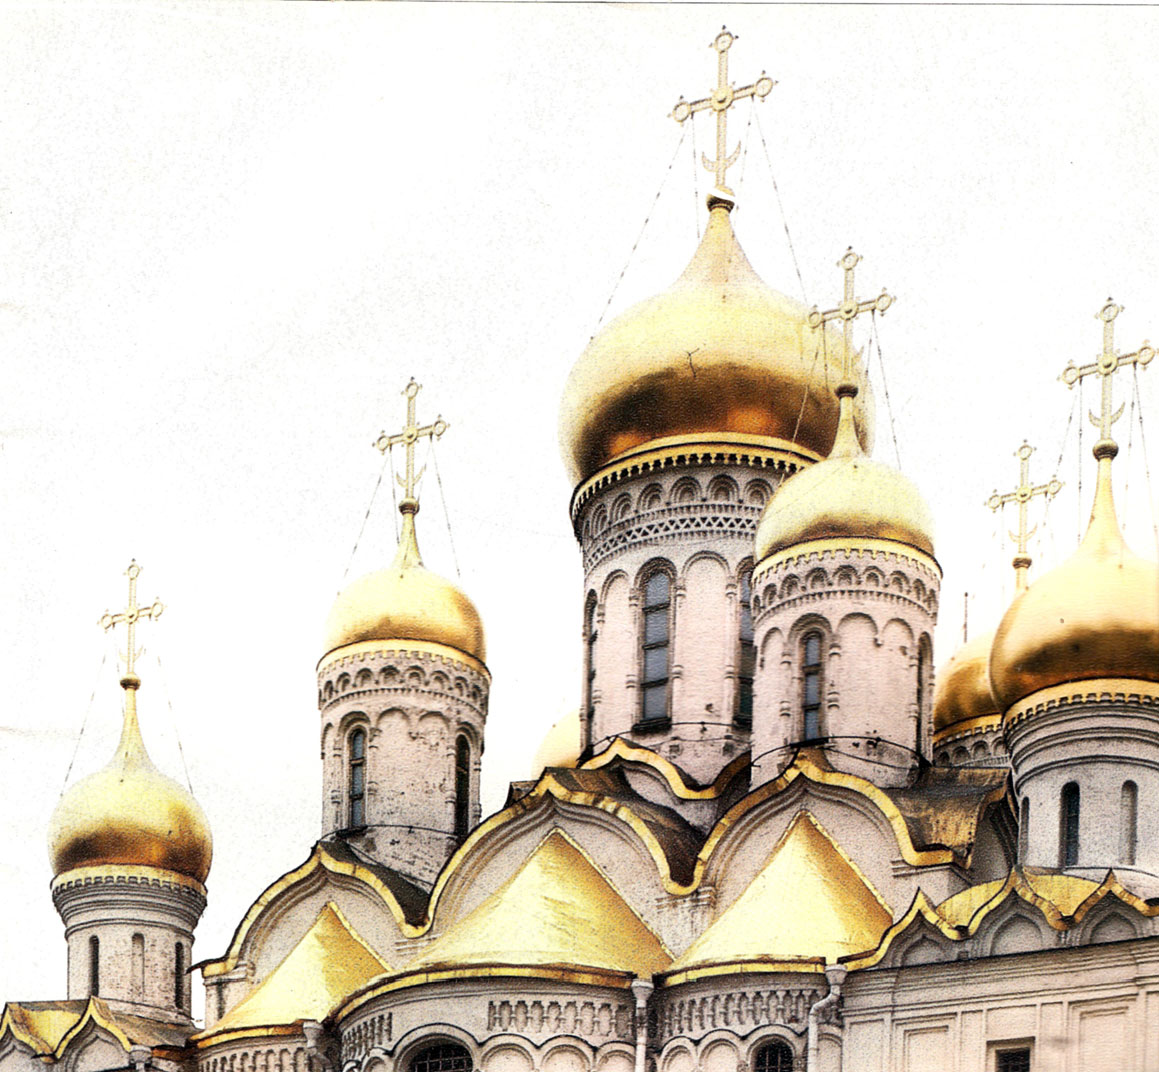 Благовещенский собор. Купола. Cathedral of the Annunciation. The domes